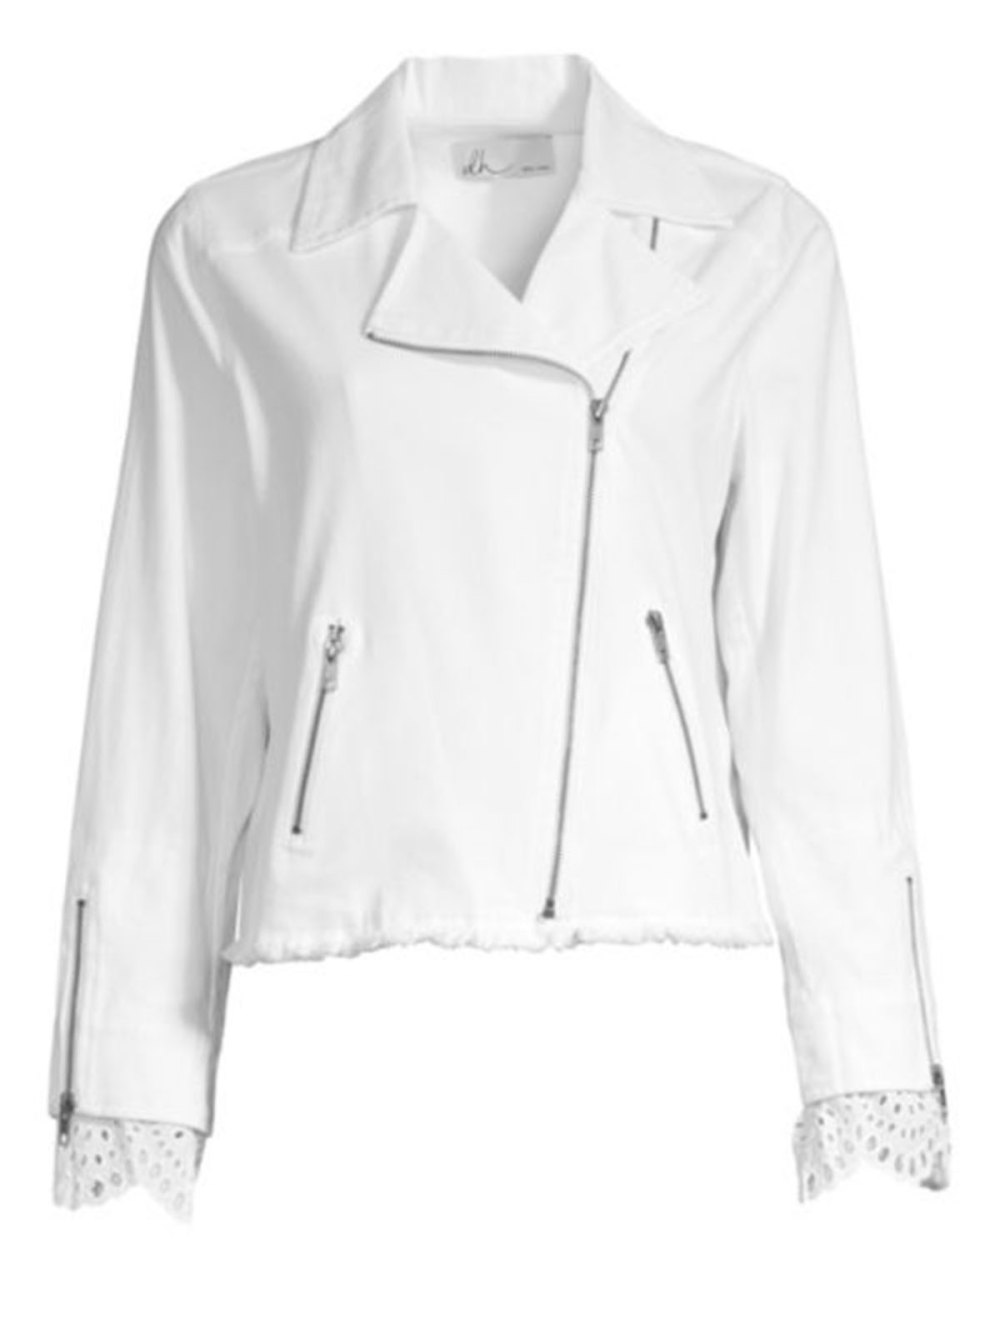 The All-White Trend Has Never Been Easier Thanks to This Moto Jacket ...